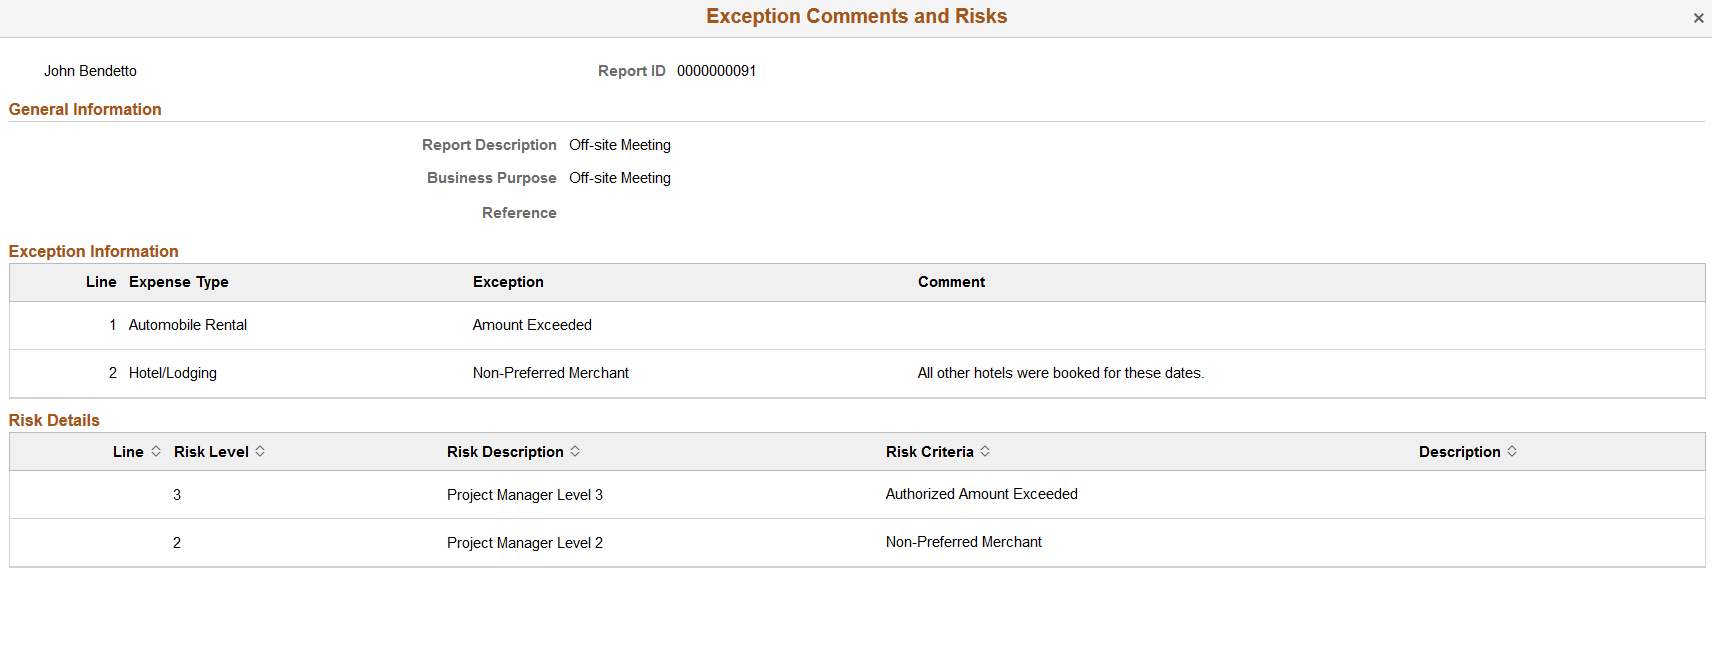 Exception Comments and Risks page